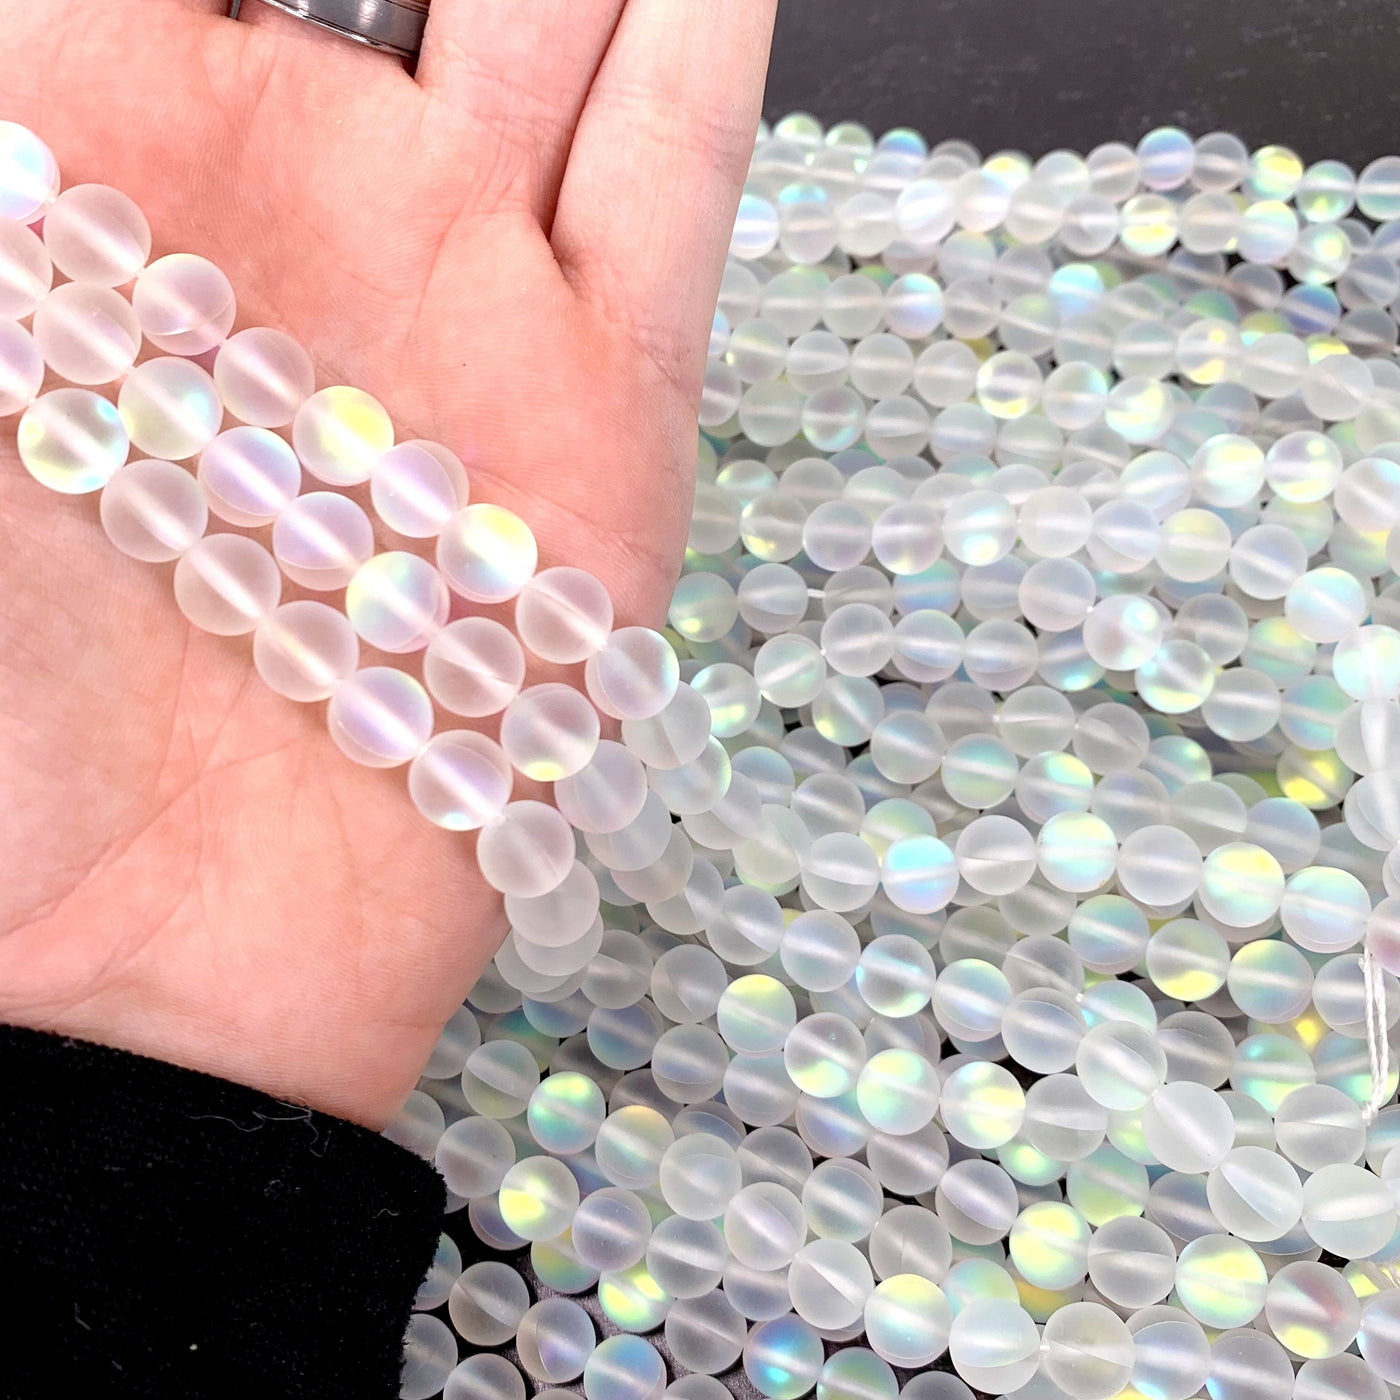 Opalite Polished Beads - 3 strands in a hand